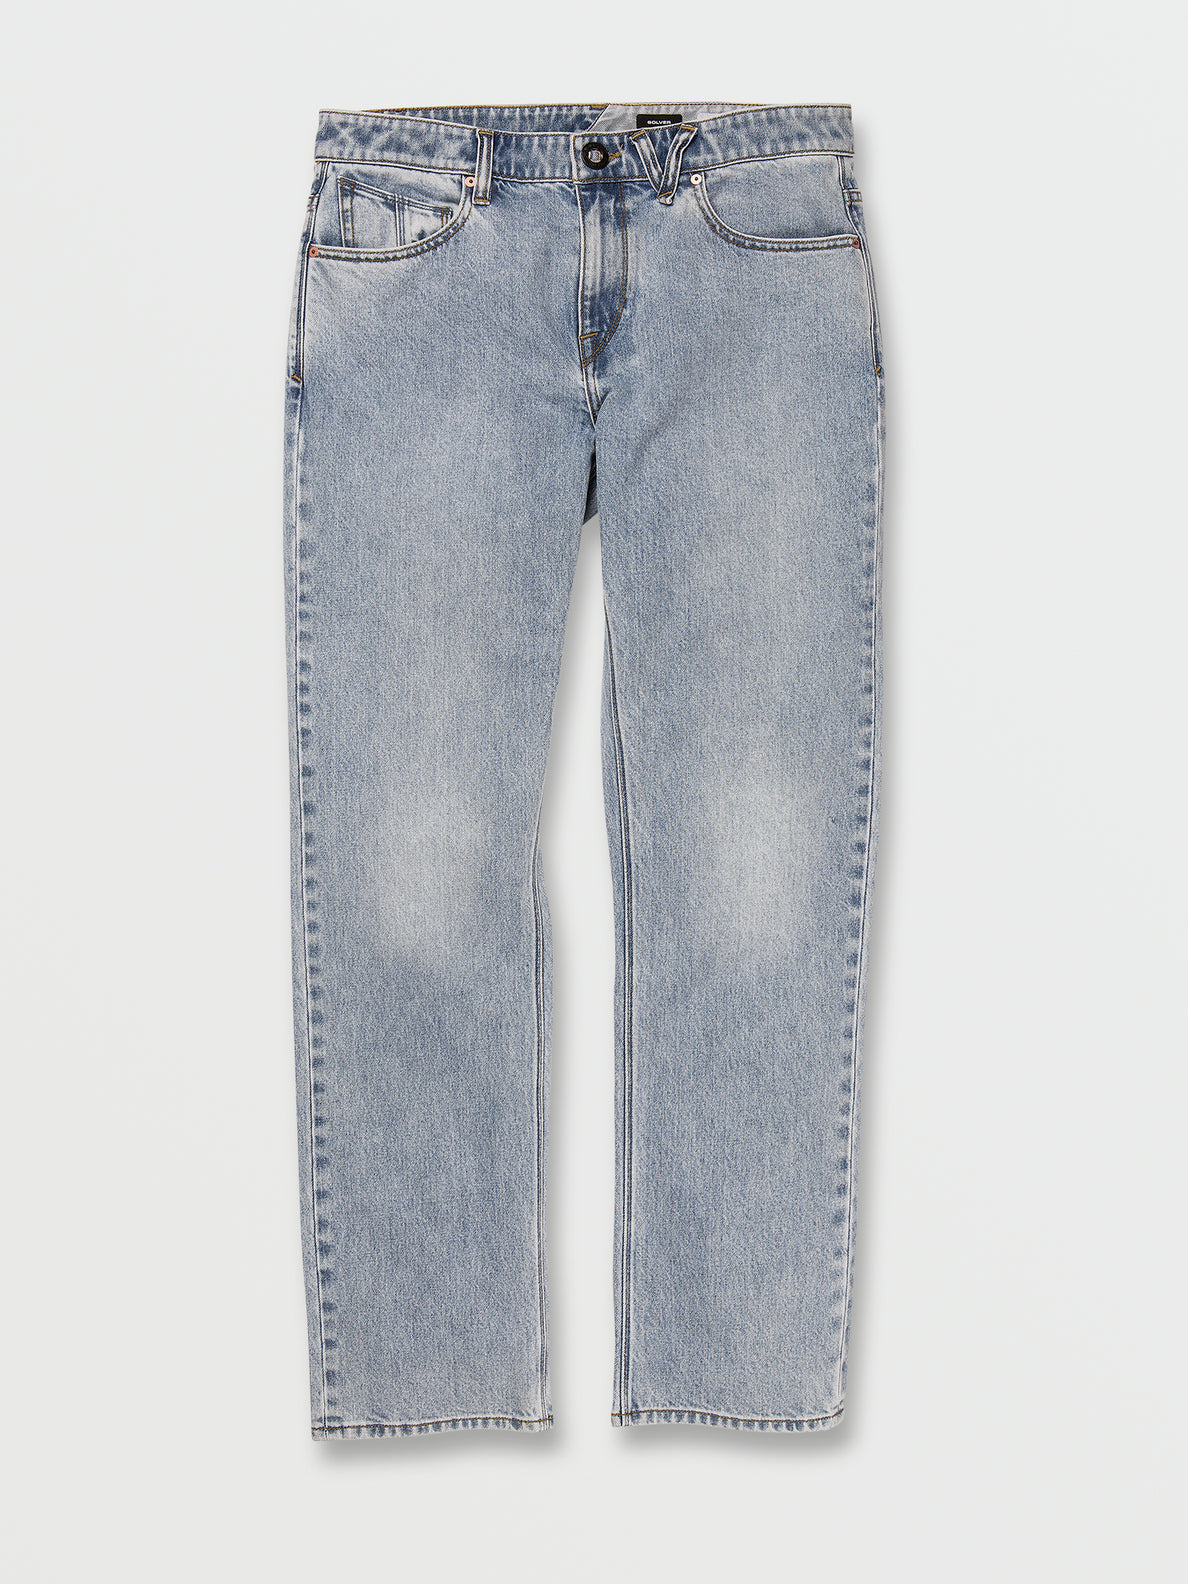 Solver Modern Fit Jeans - Heavy Worn Faded (A1932204_HWR) [F]